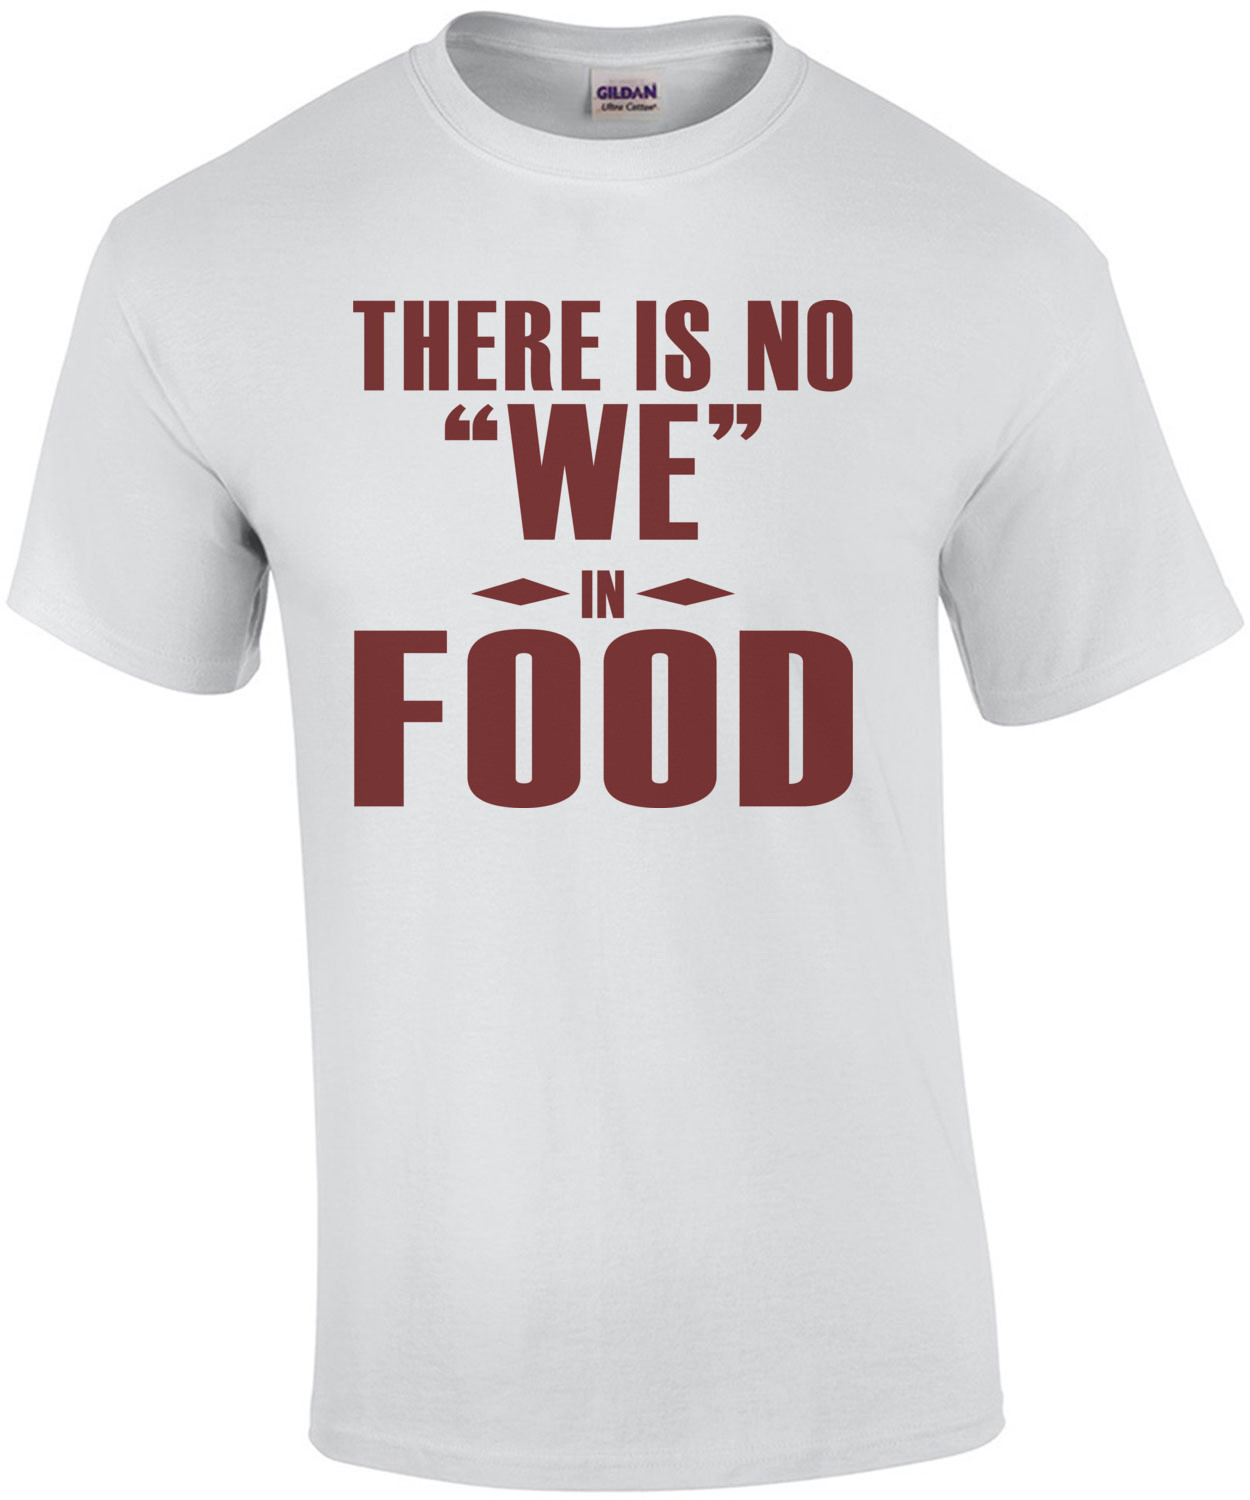 There is no WE in FOOD T-Shirt